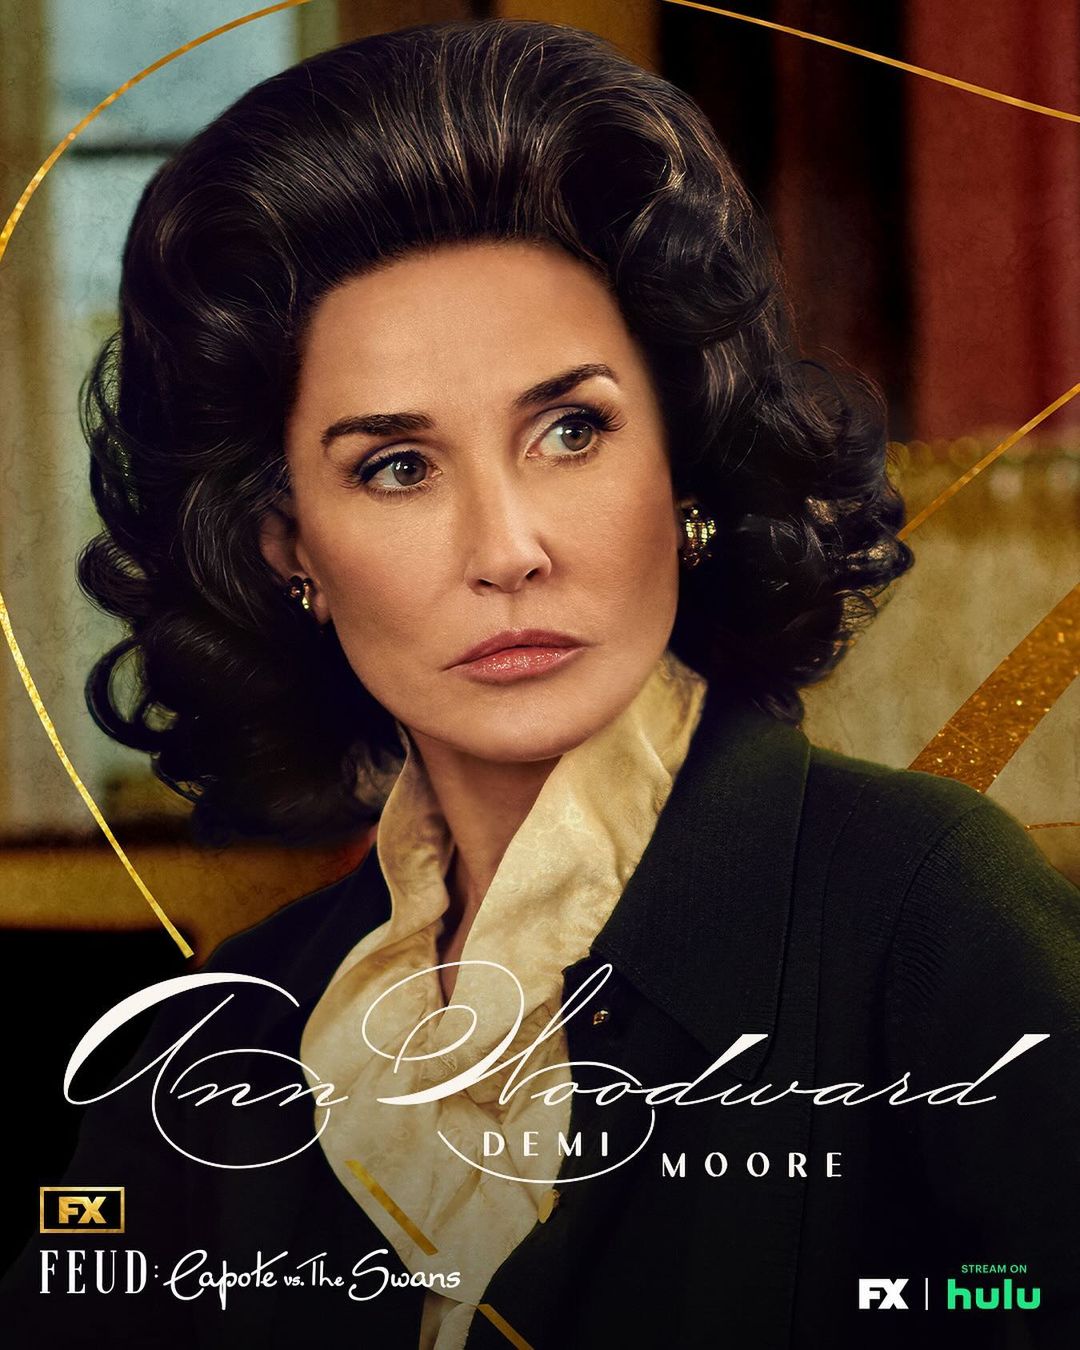 Demi Moore plays tragic socialite, Anne Woodward in "FEUD: Capote vs. The Swans"